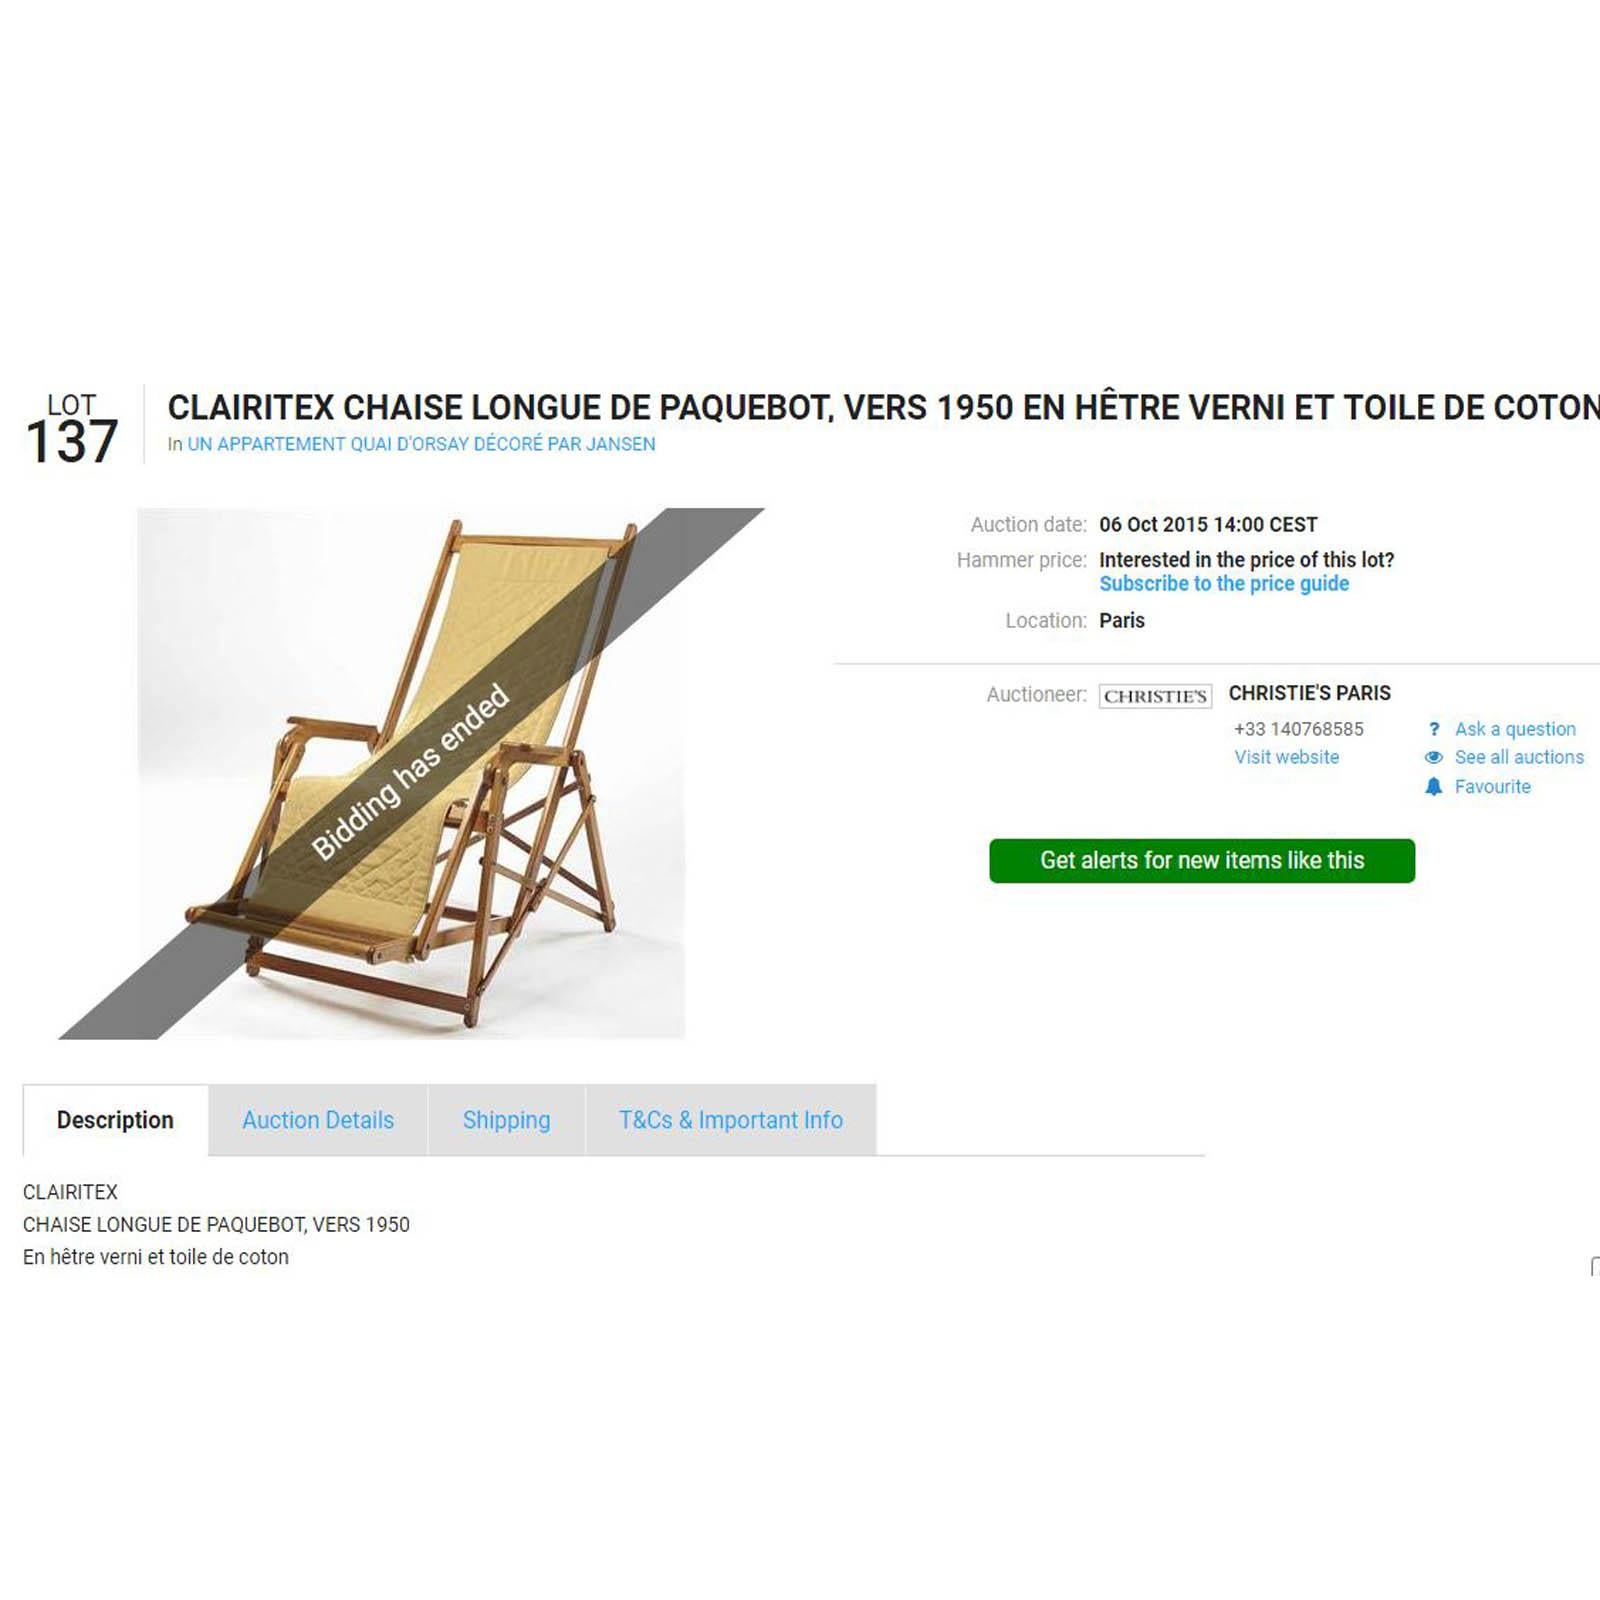 Midcentury French Folding Canvas Long Chair, Clairitex Chaise Long de Paquebot 1